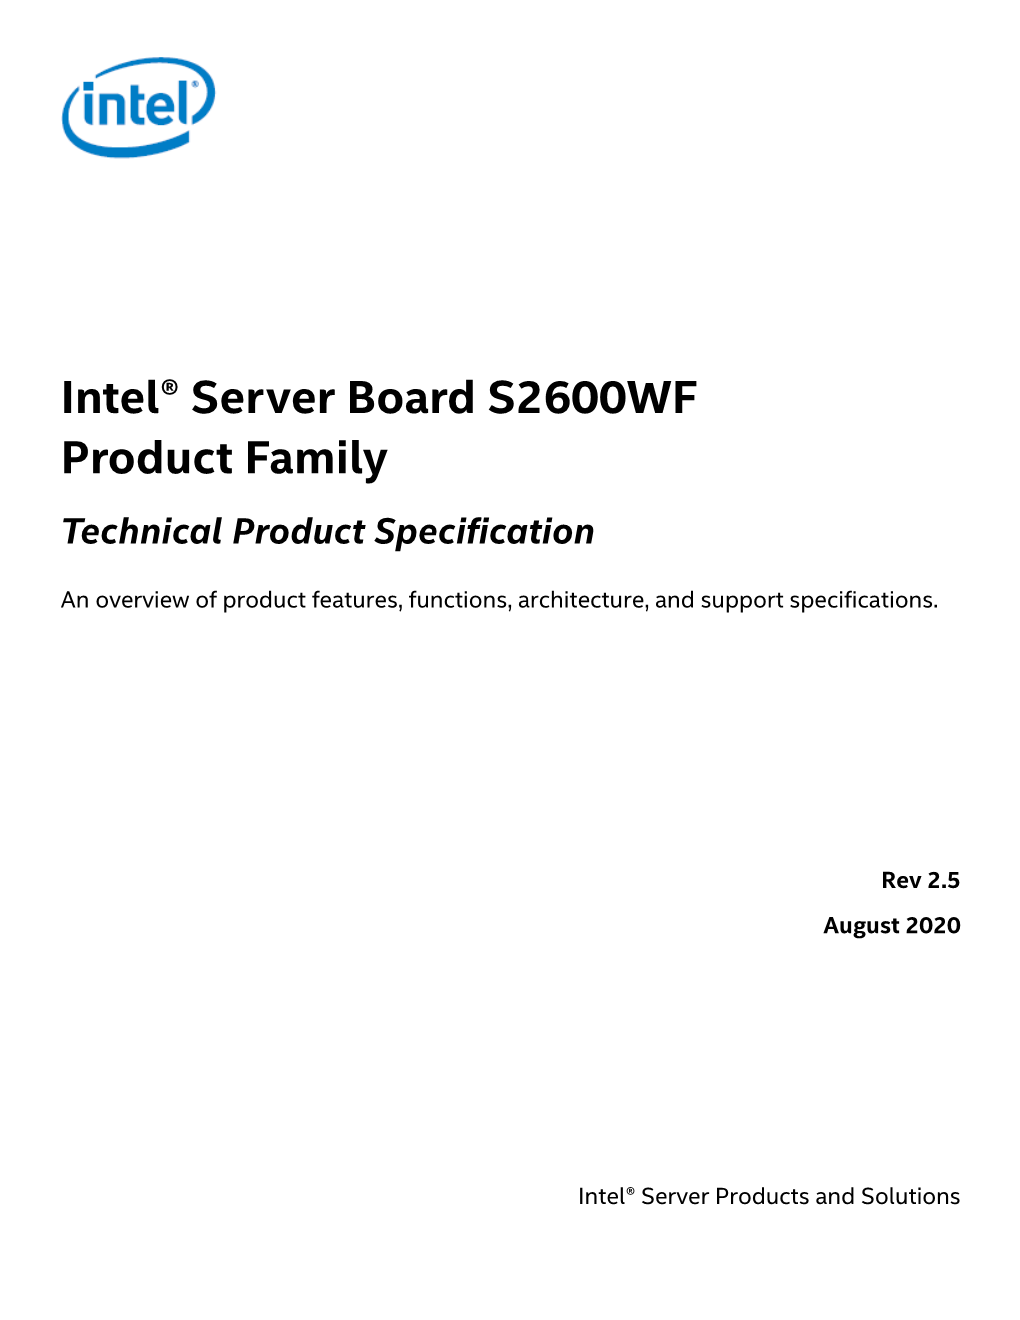 S2600WF Technical Product Specification